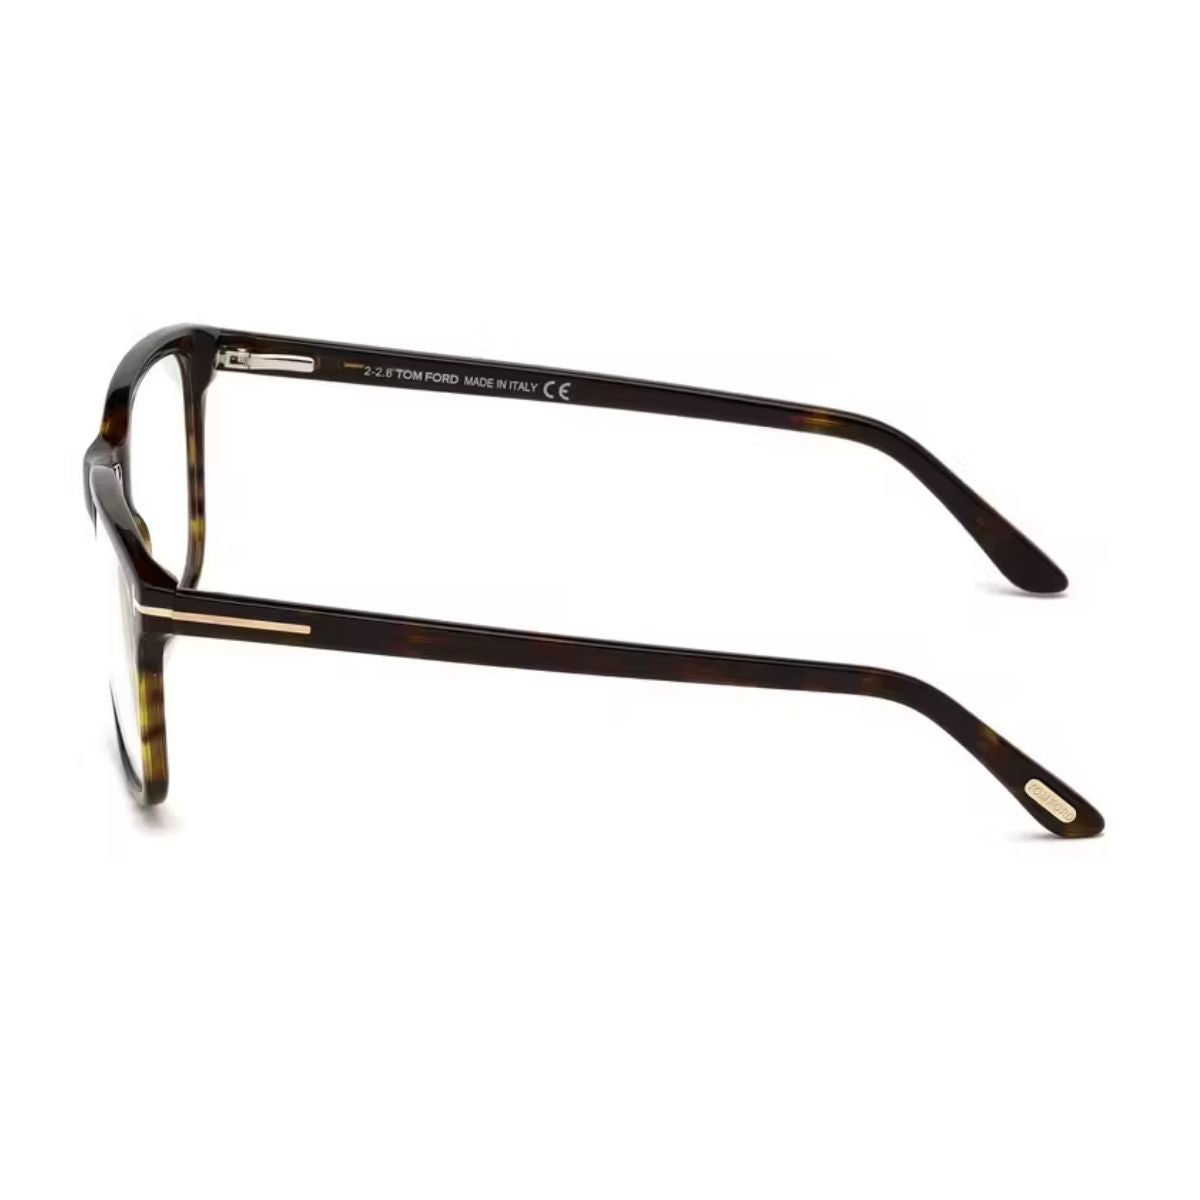 "Men's optical glasses by Tom Ford, model TF 5479 052, featuring a square shape and Havana color, with free shipping from Optorium."